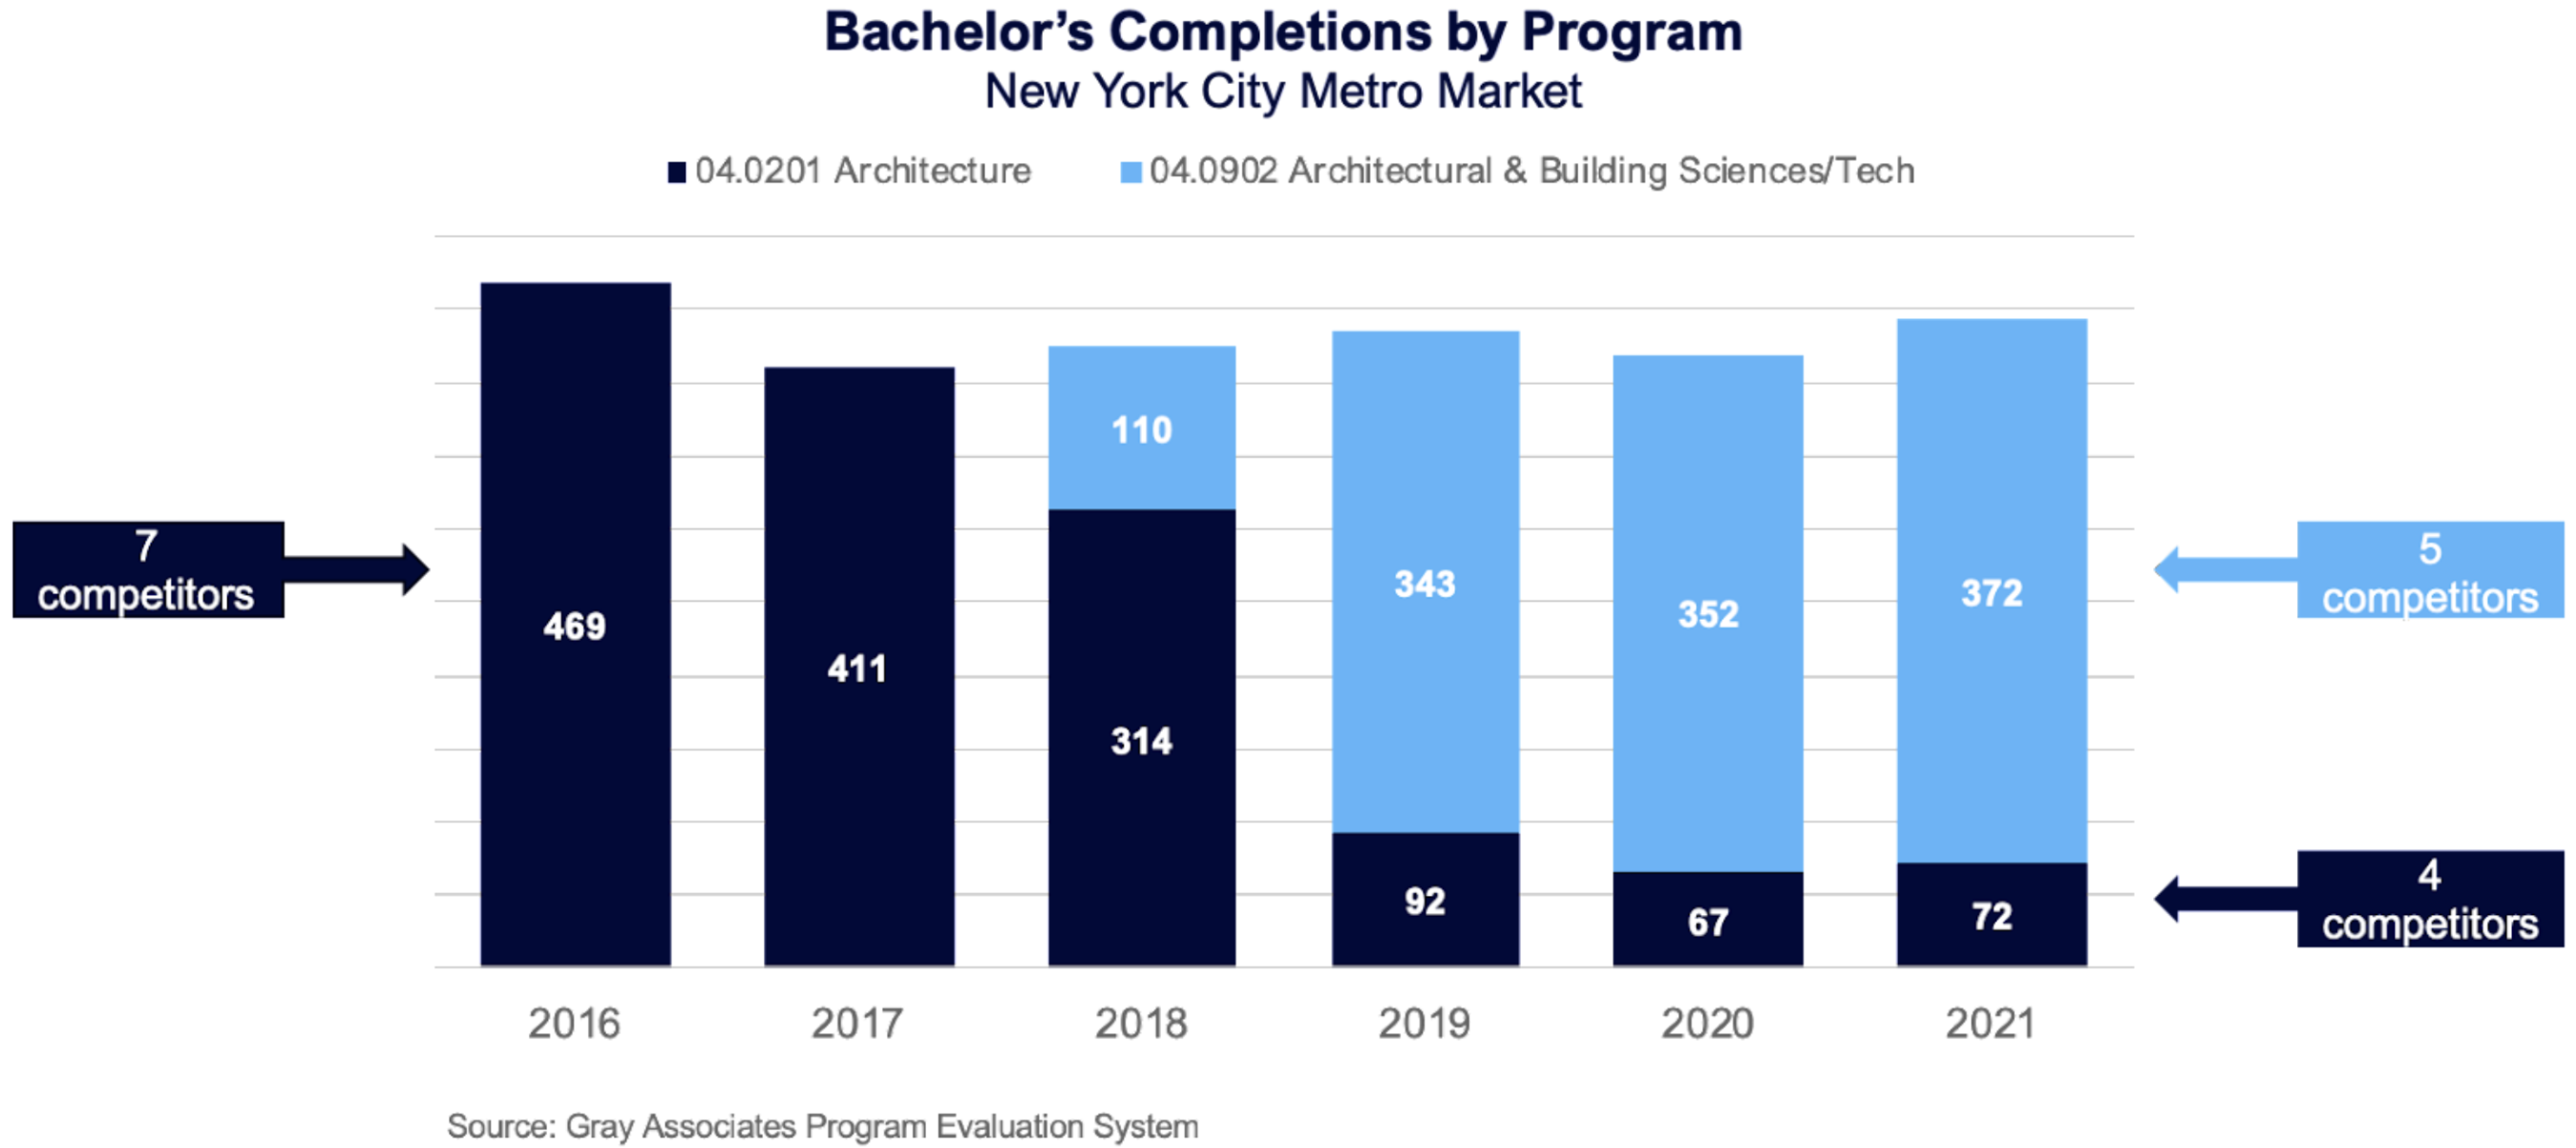 Bachelor's Completions by Program (New York City Metro Market)